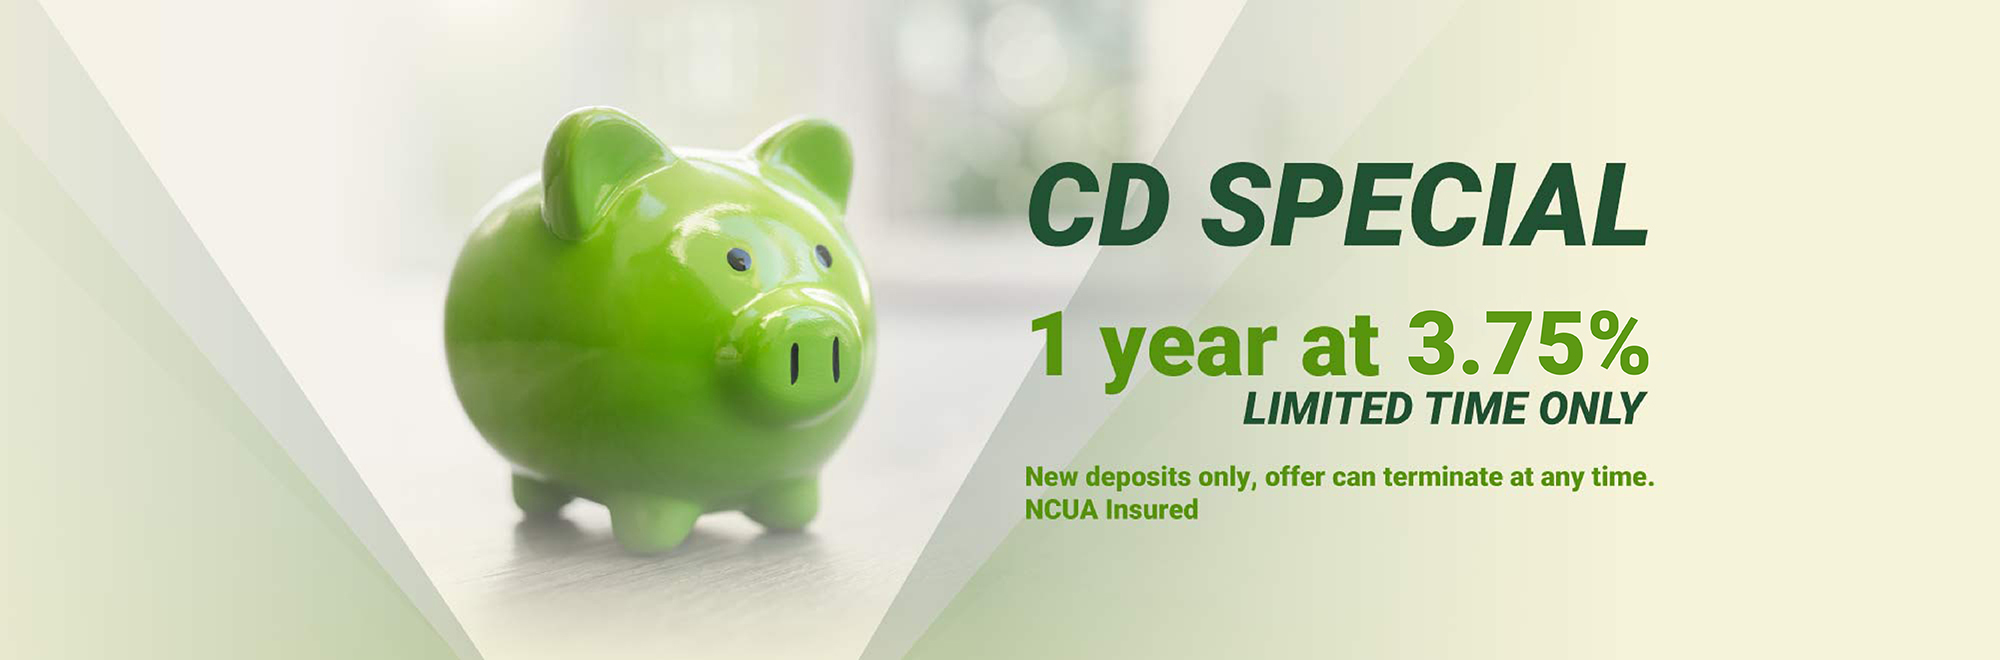 Limited time only 1 year CD Special at 3.75%. New deposits only, offer can terminate at any time. NCUA Insured. 